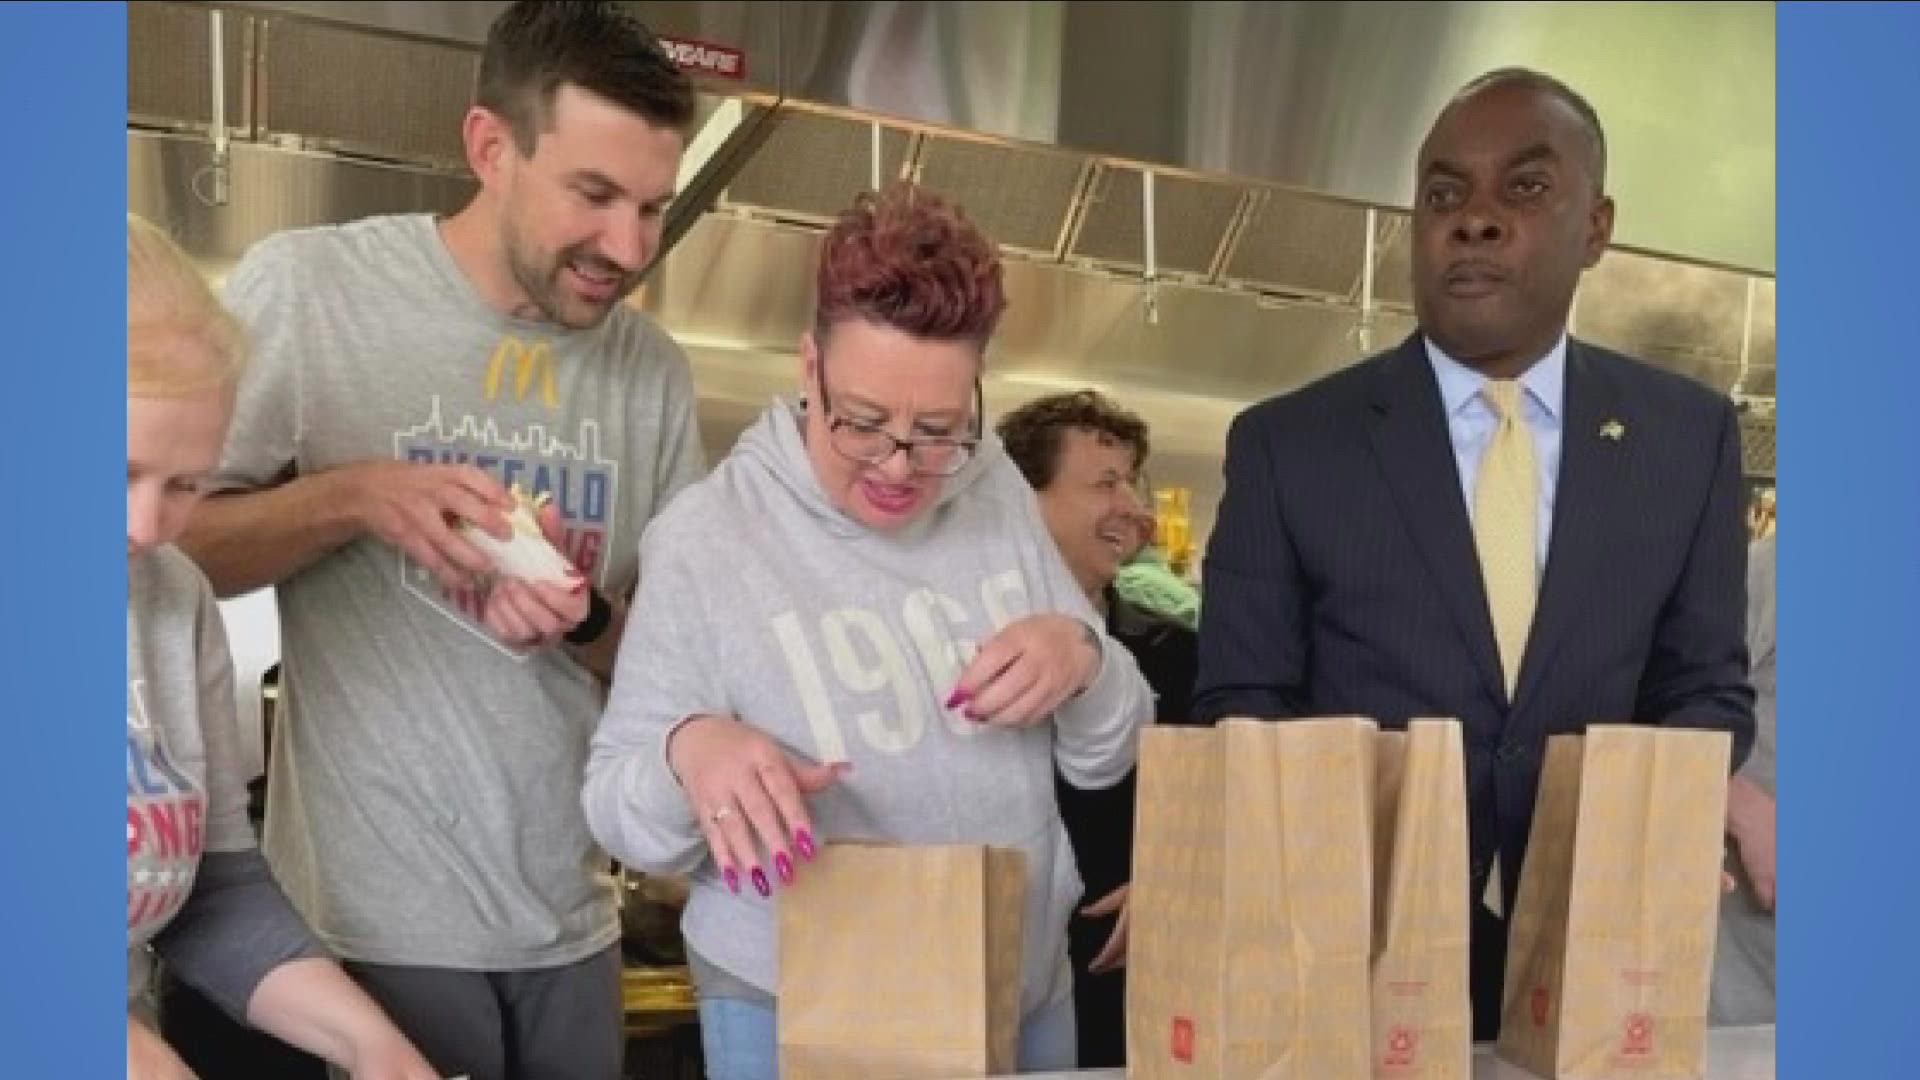 Dave Singelyn worked with McDonald's and the Recource Council of WNY to serve meals to the East Buffalo community out of the "McRig."